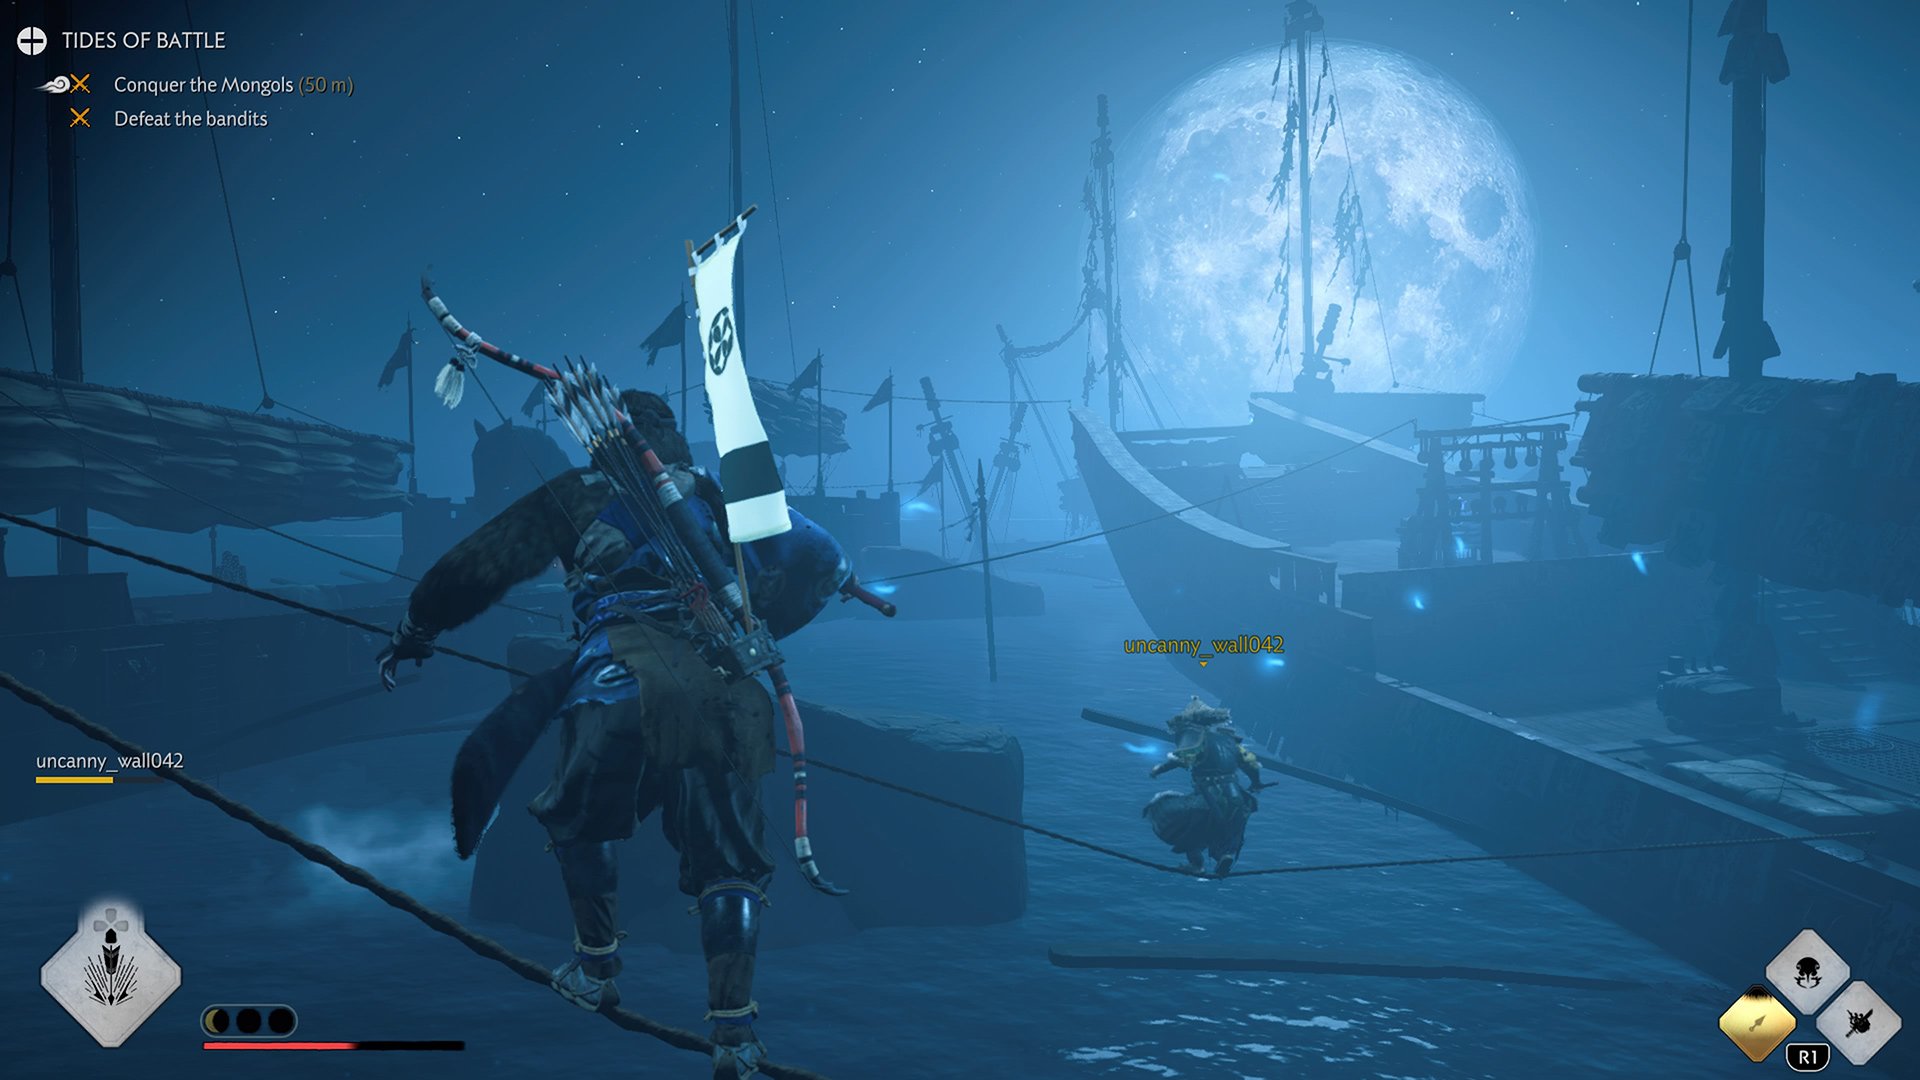 Stealthing under the moonlight across ships